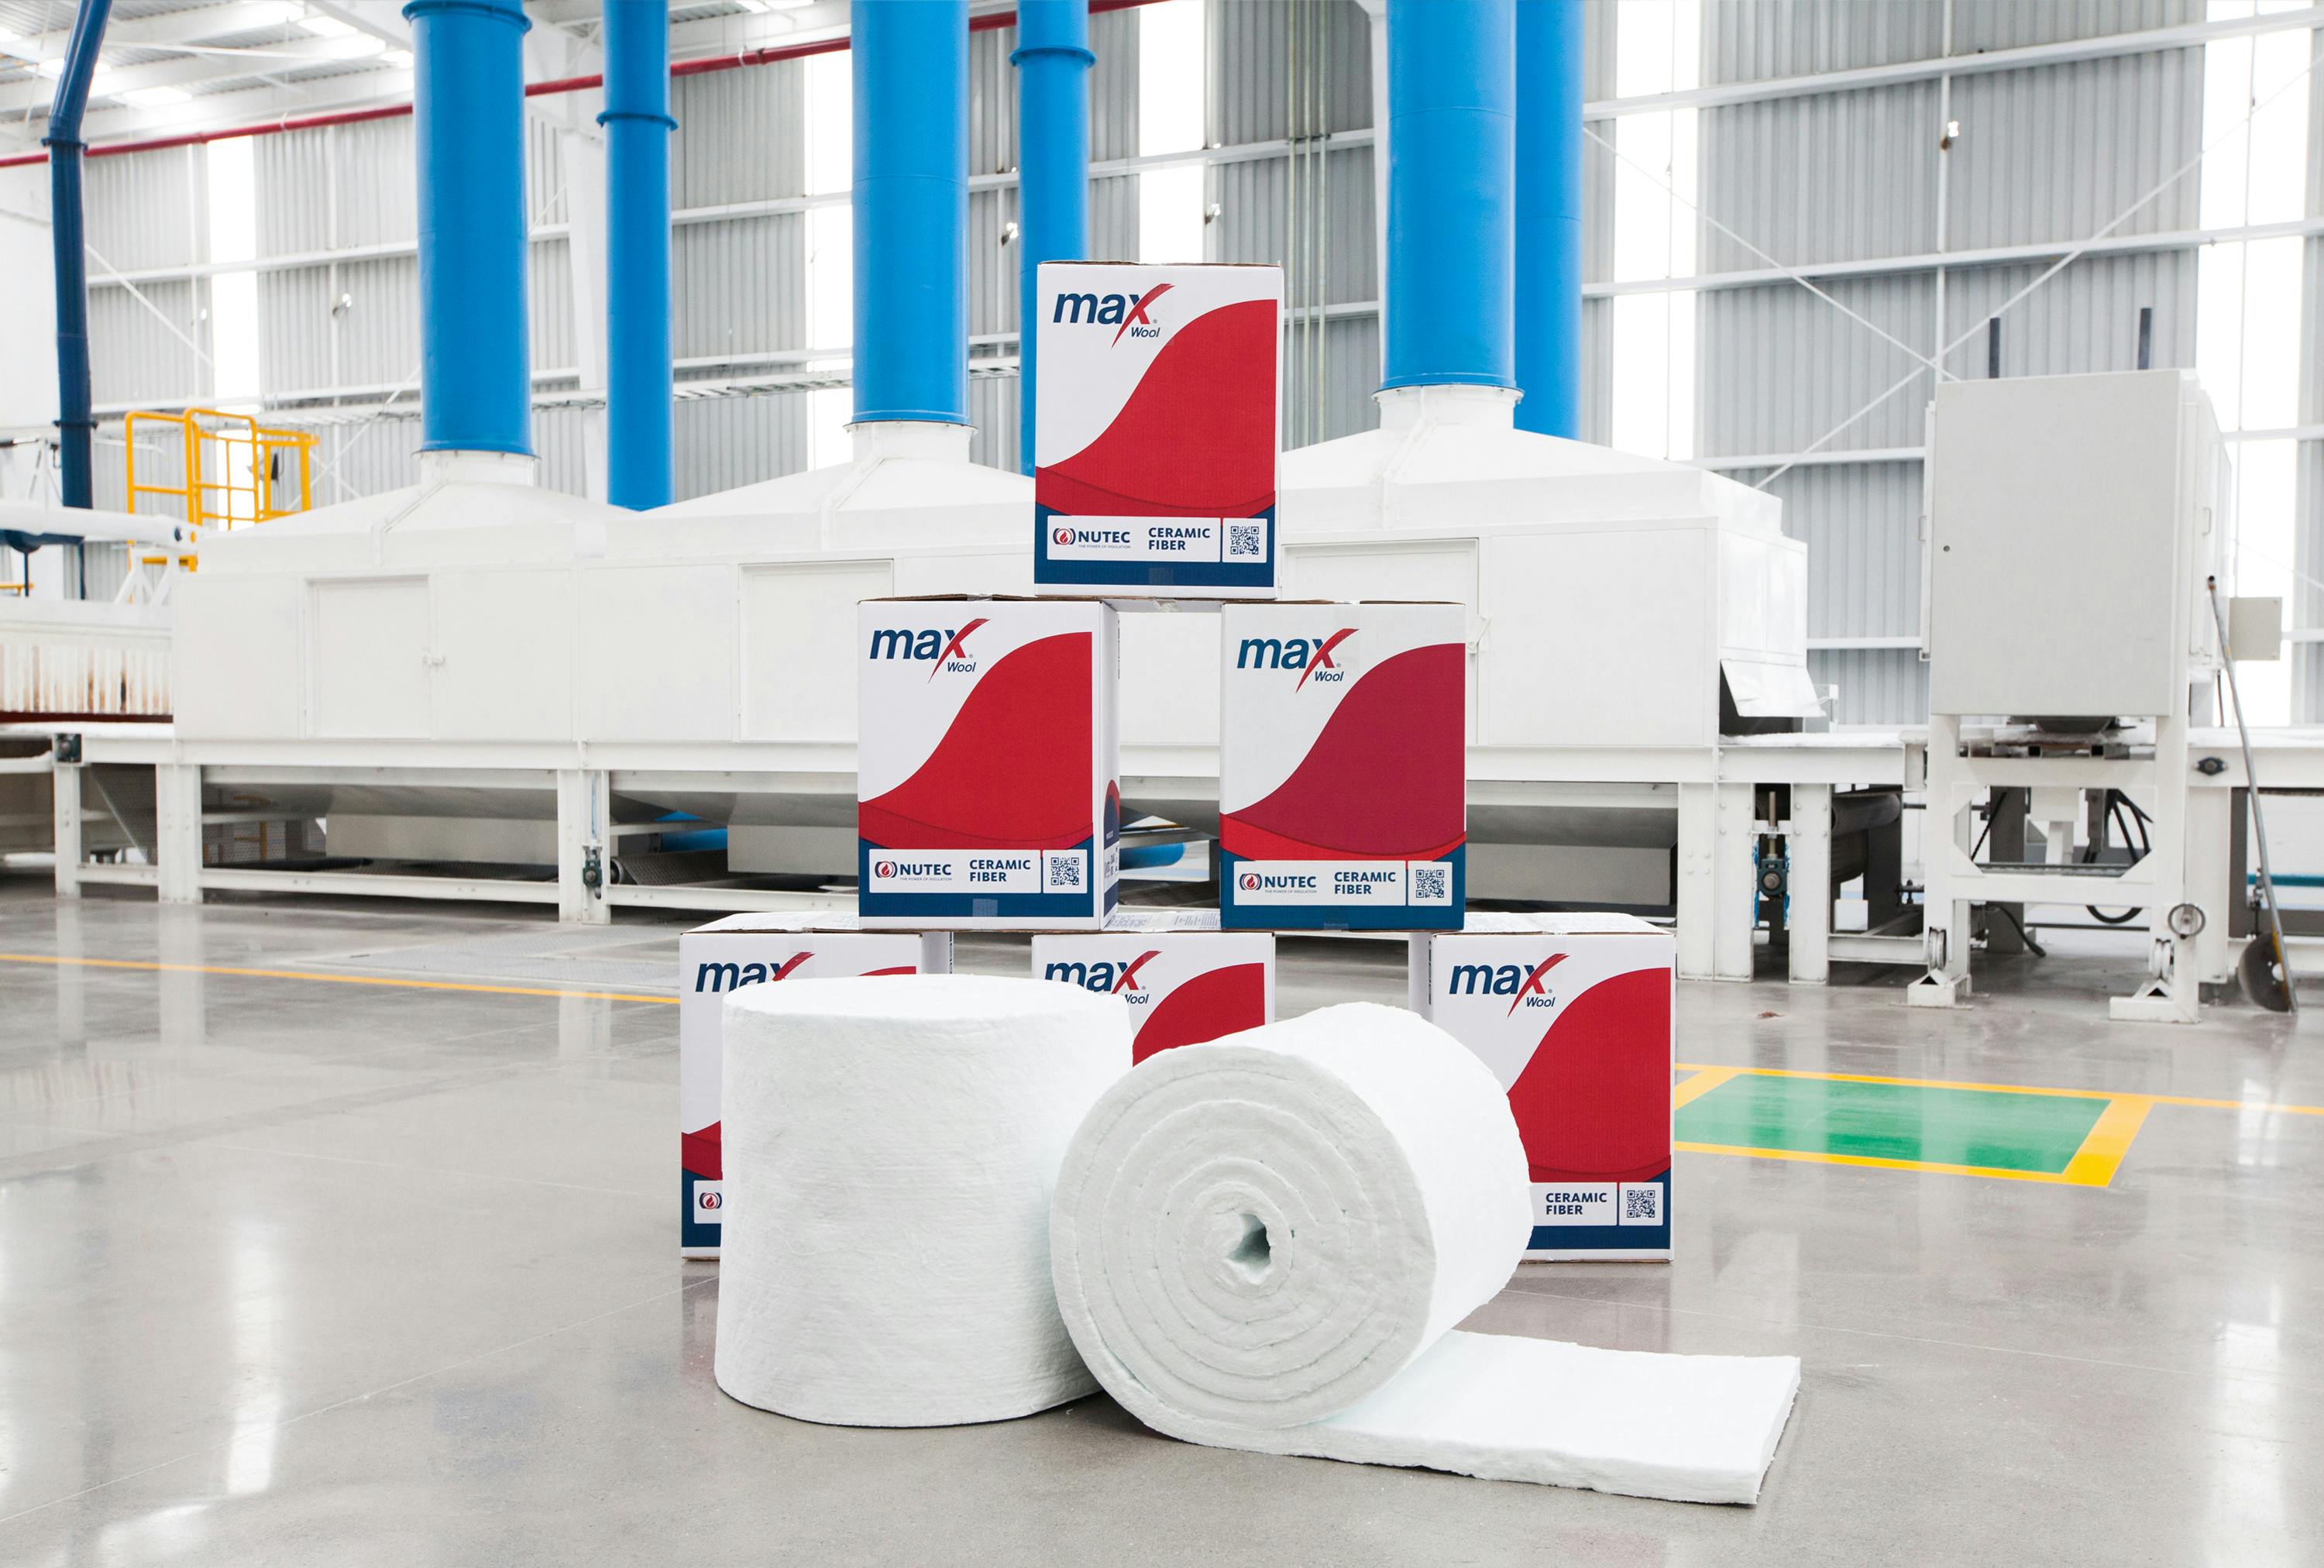 NUTEC’s insulation products